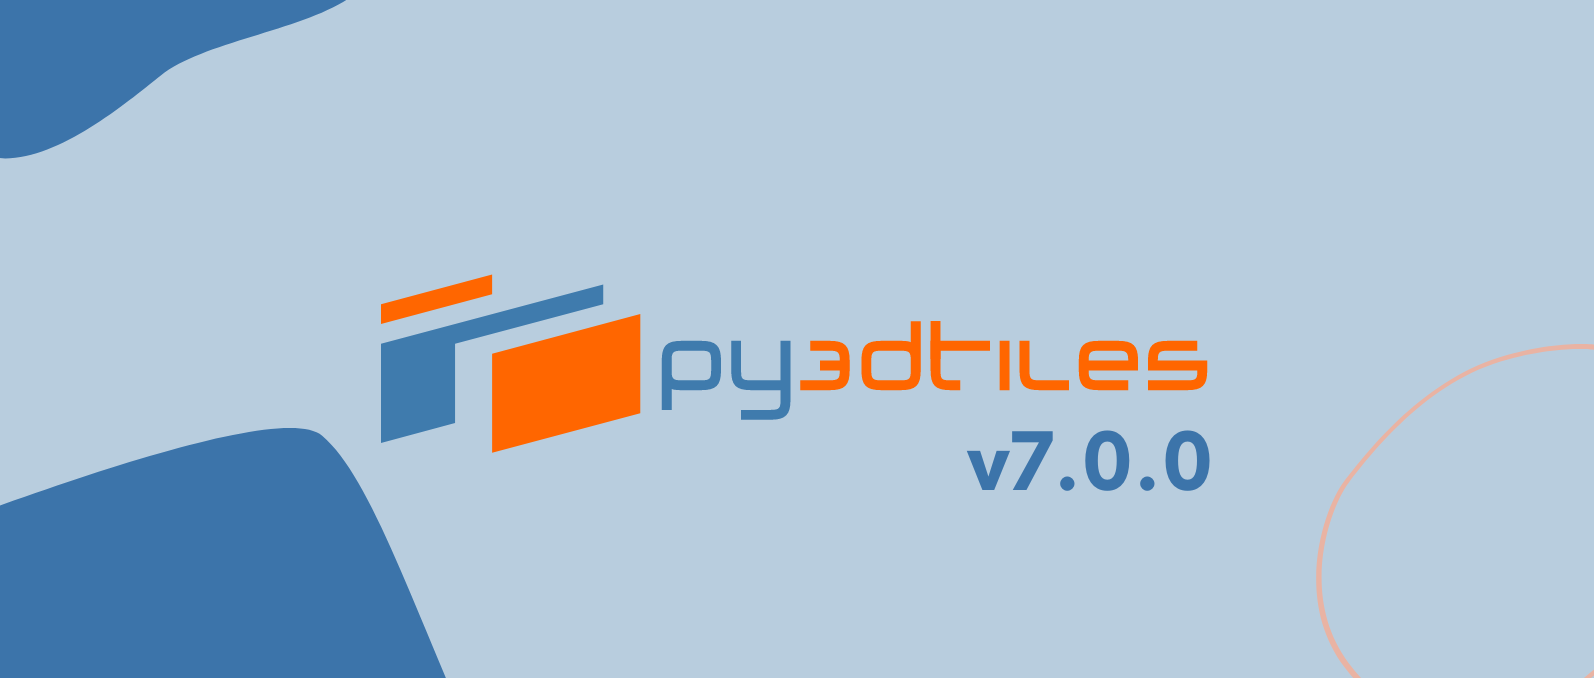 Py3dtiles v7.0.0 just released! New features and a developing community!